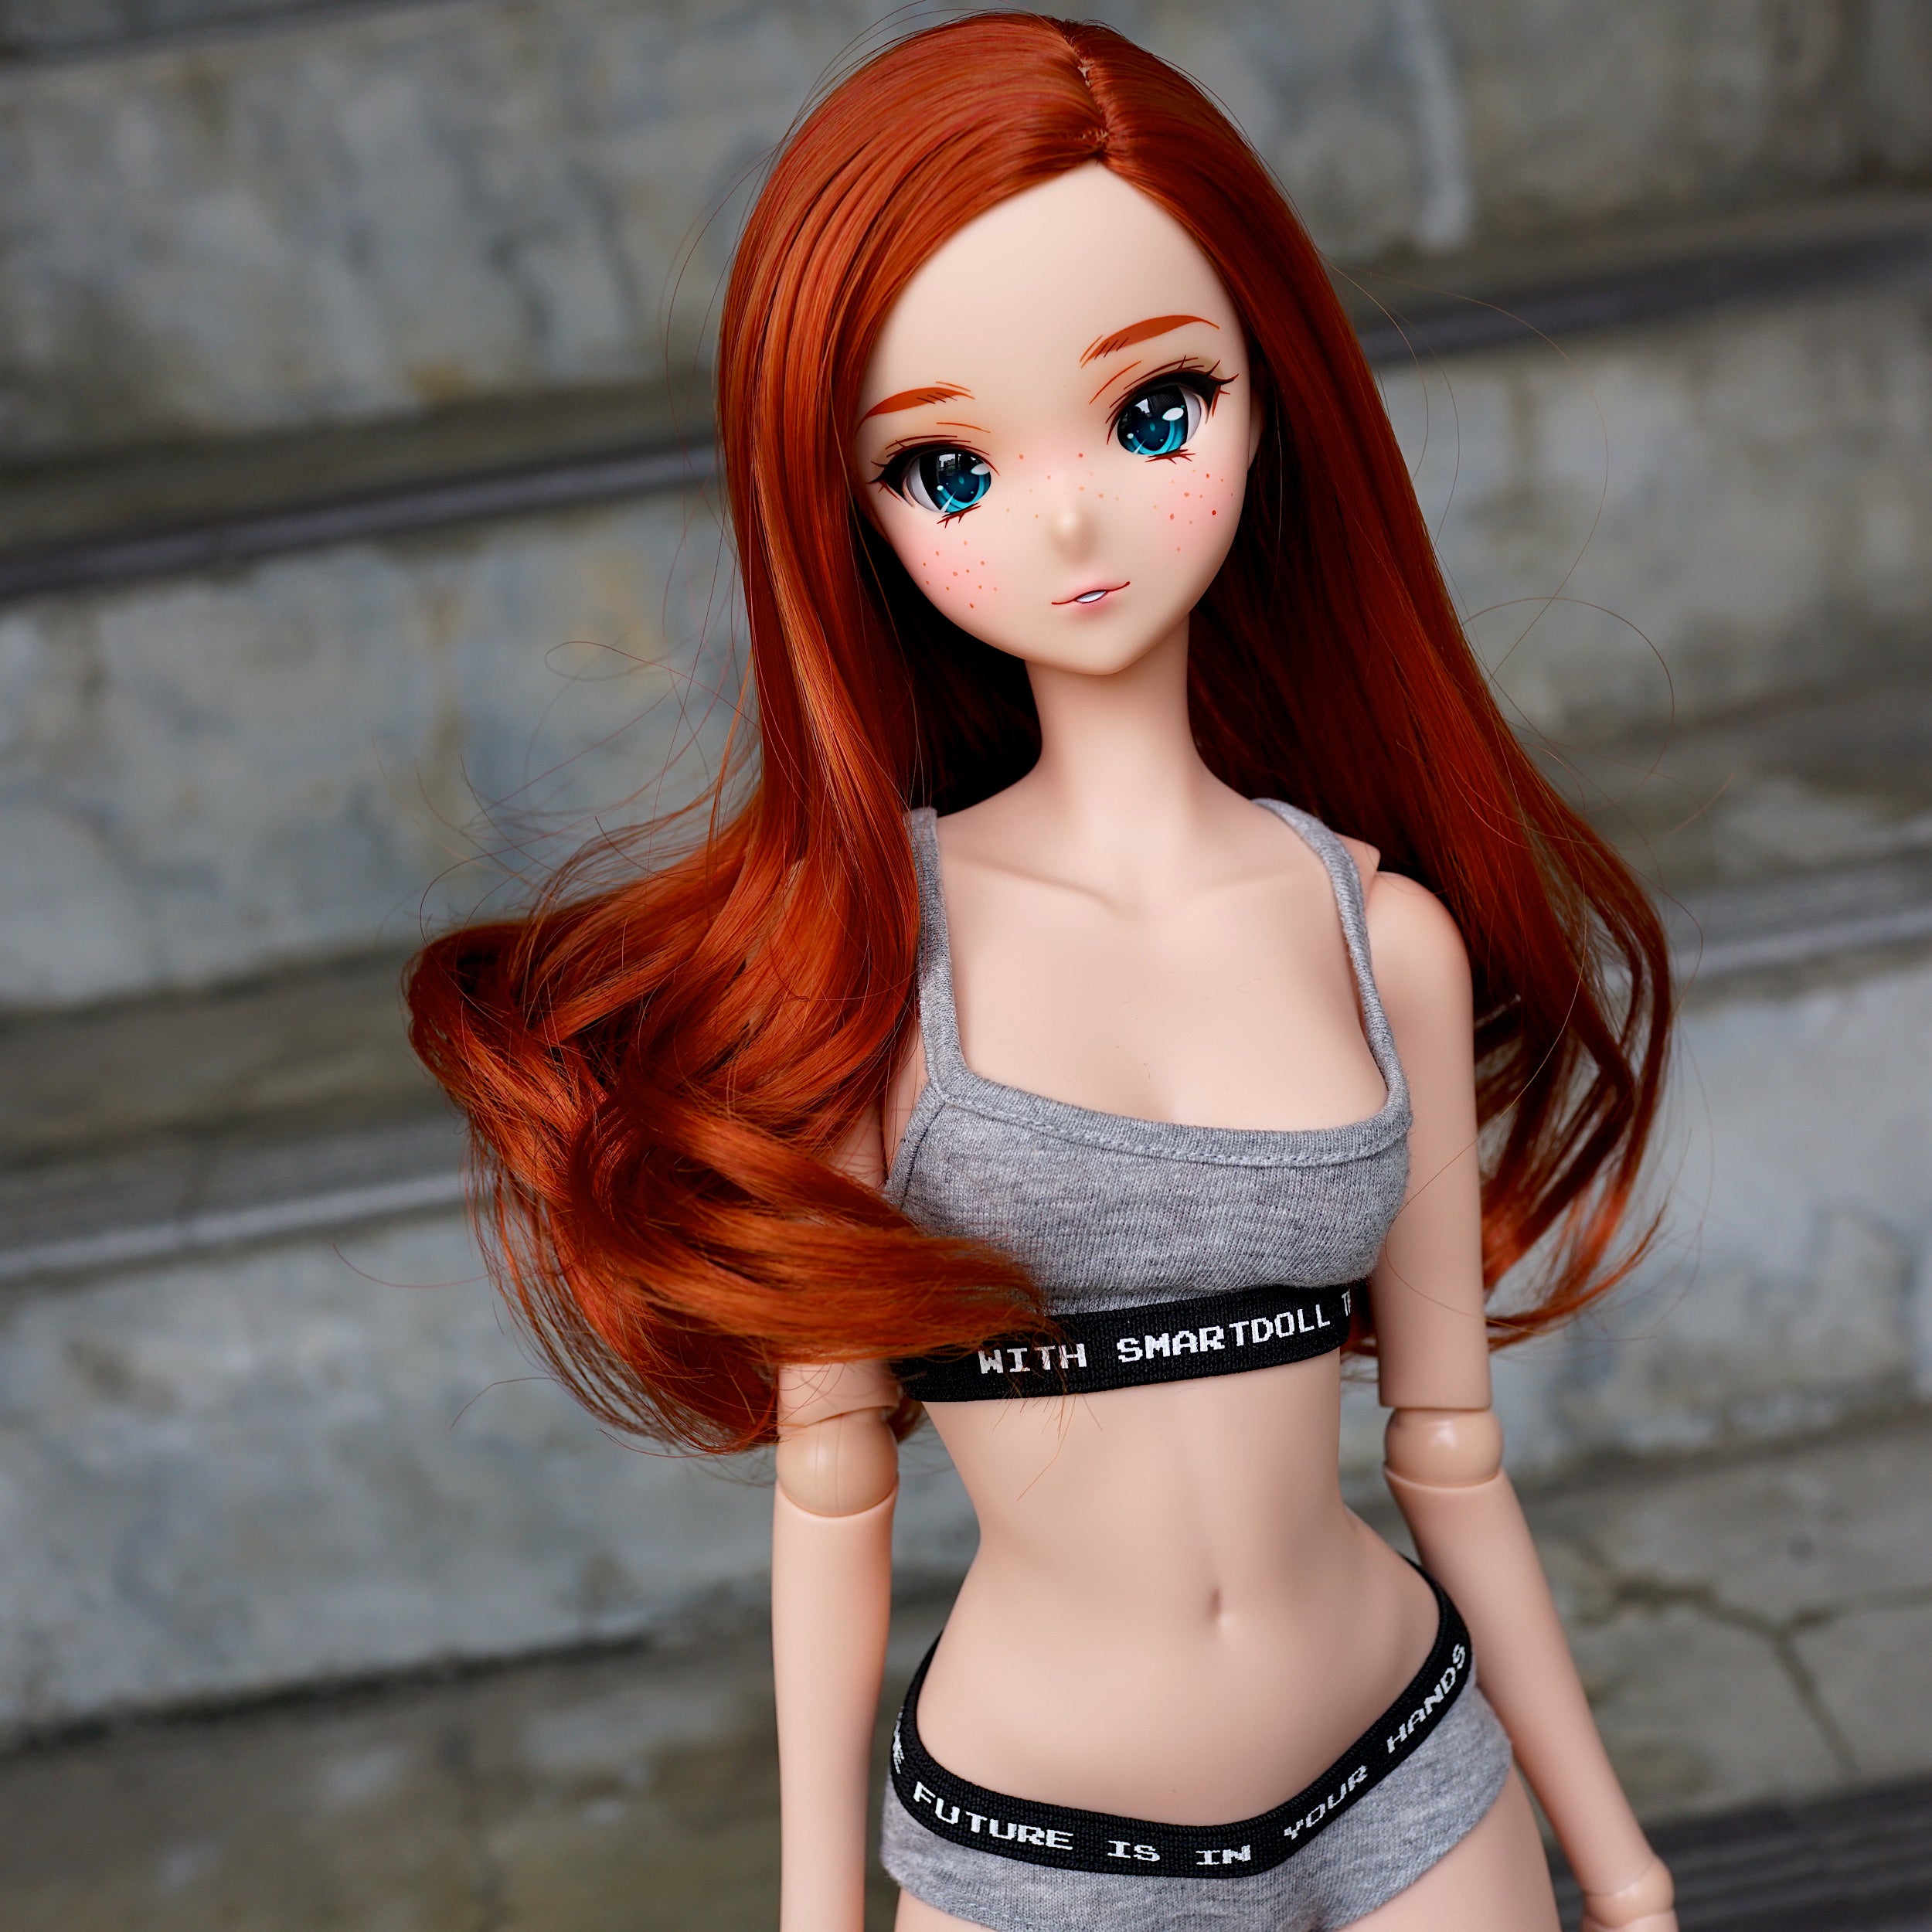 Smart Doll - Proud Prowess (Cinnamon) – Smart Doll Store